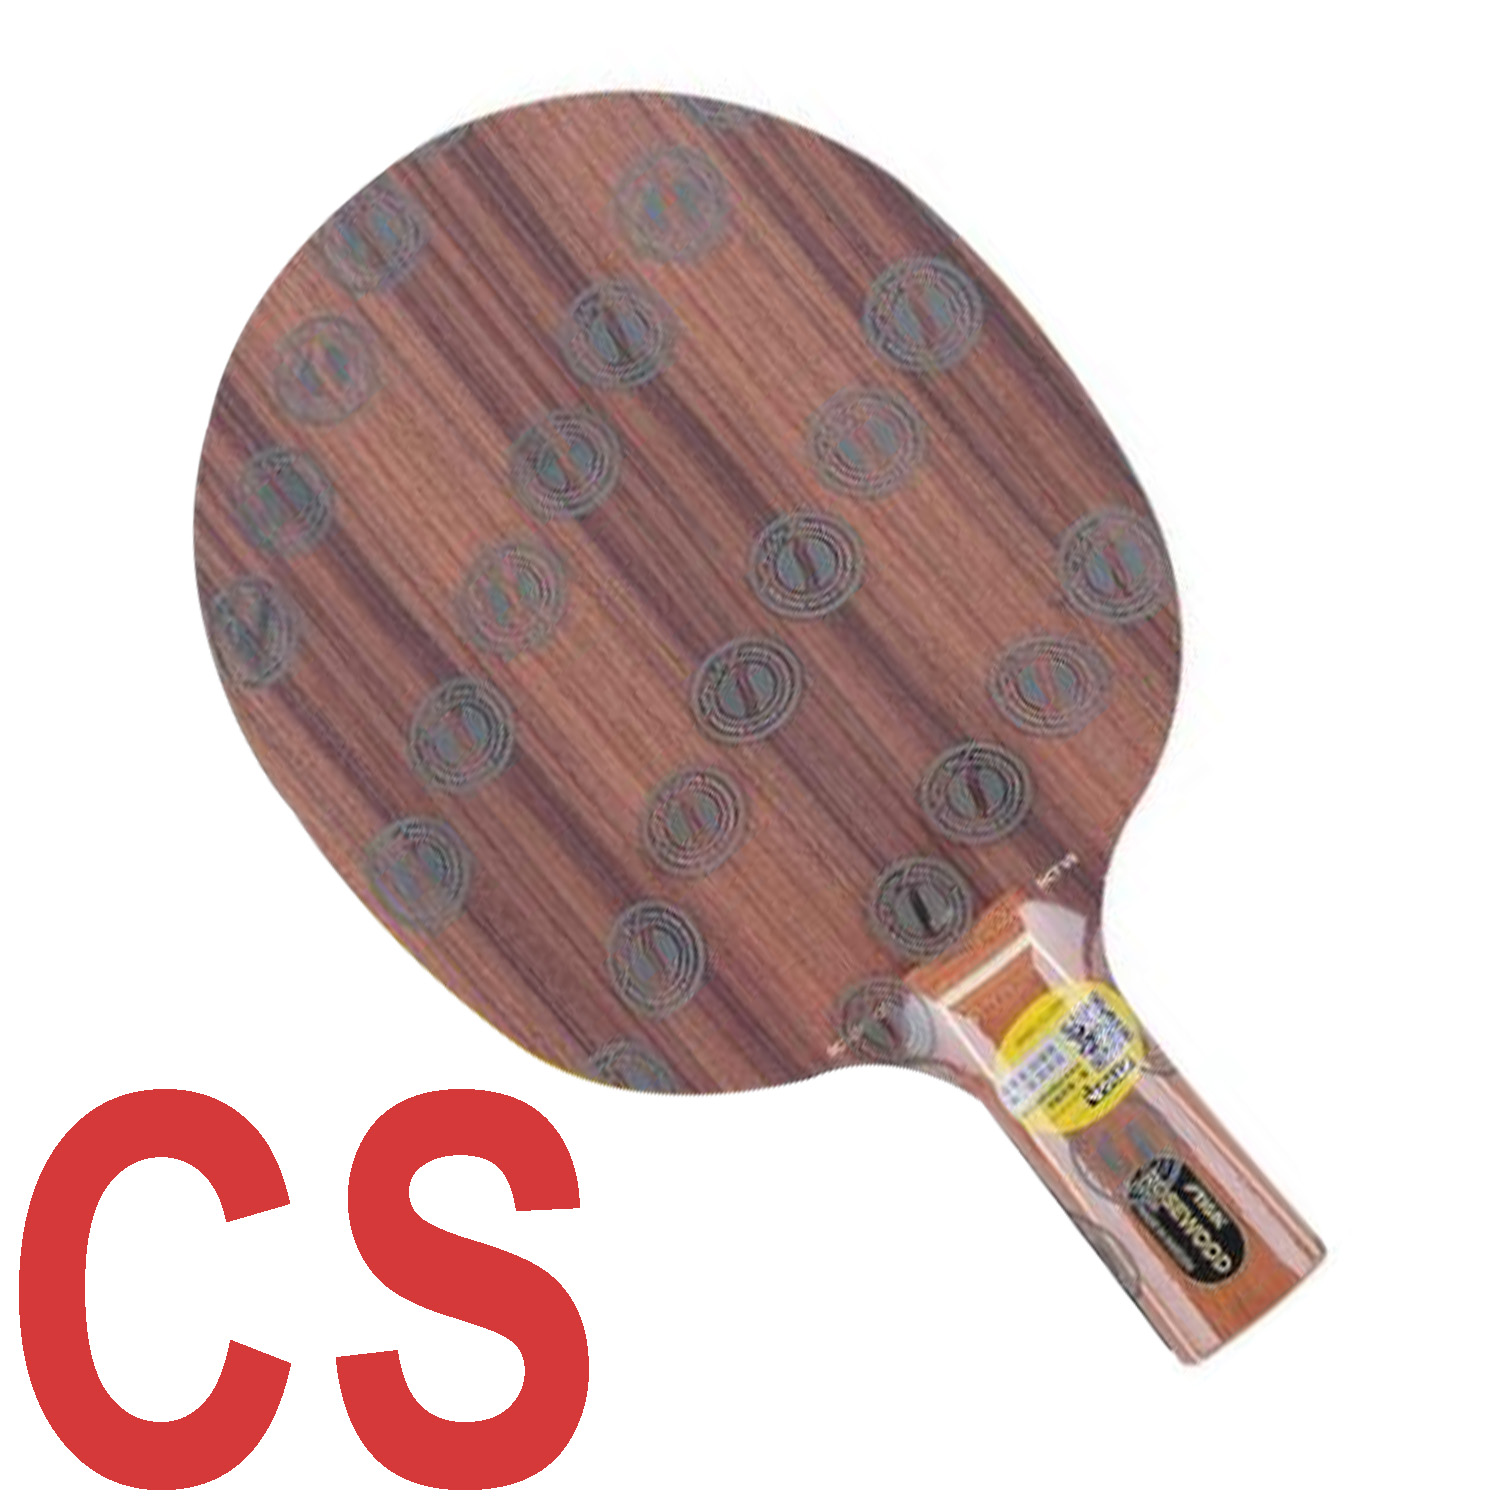 STIGA ROSEWOOD NCT VII CS HANDLE TABLE TENNIS BLADE UPDATED PRICE FOR 2021 